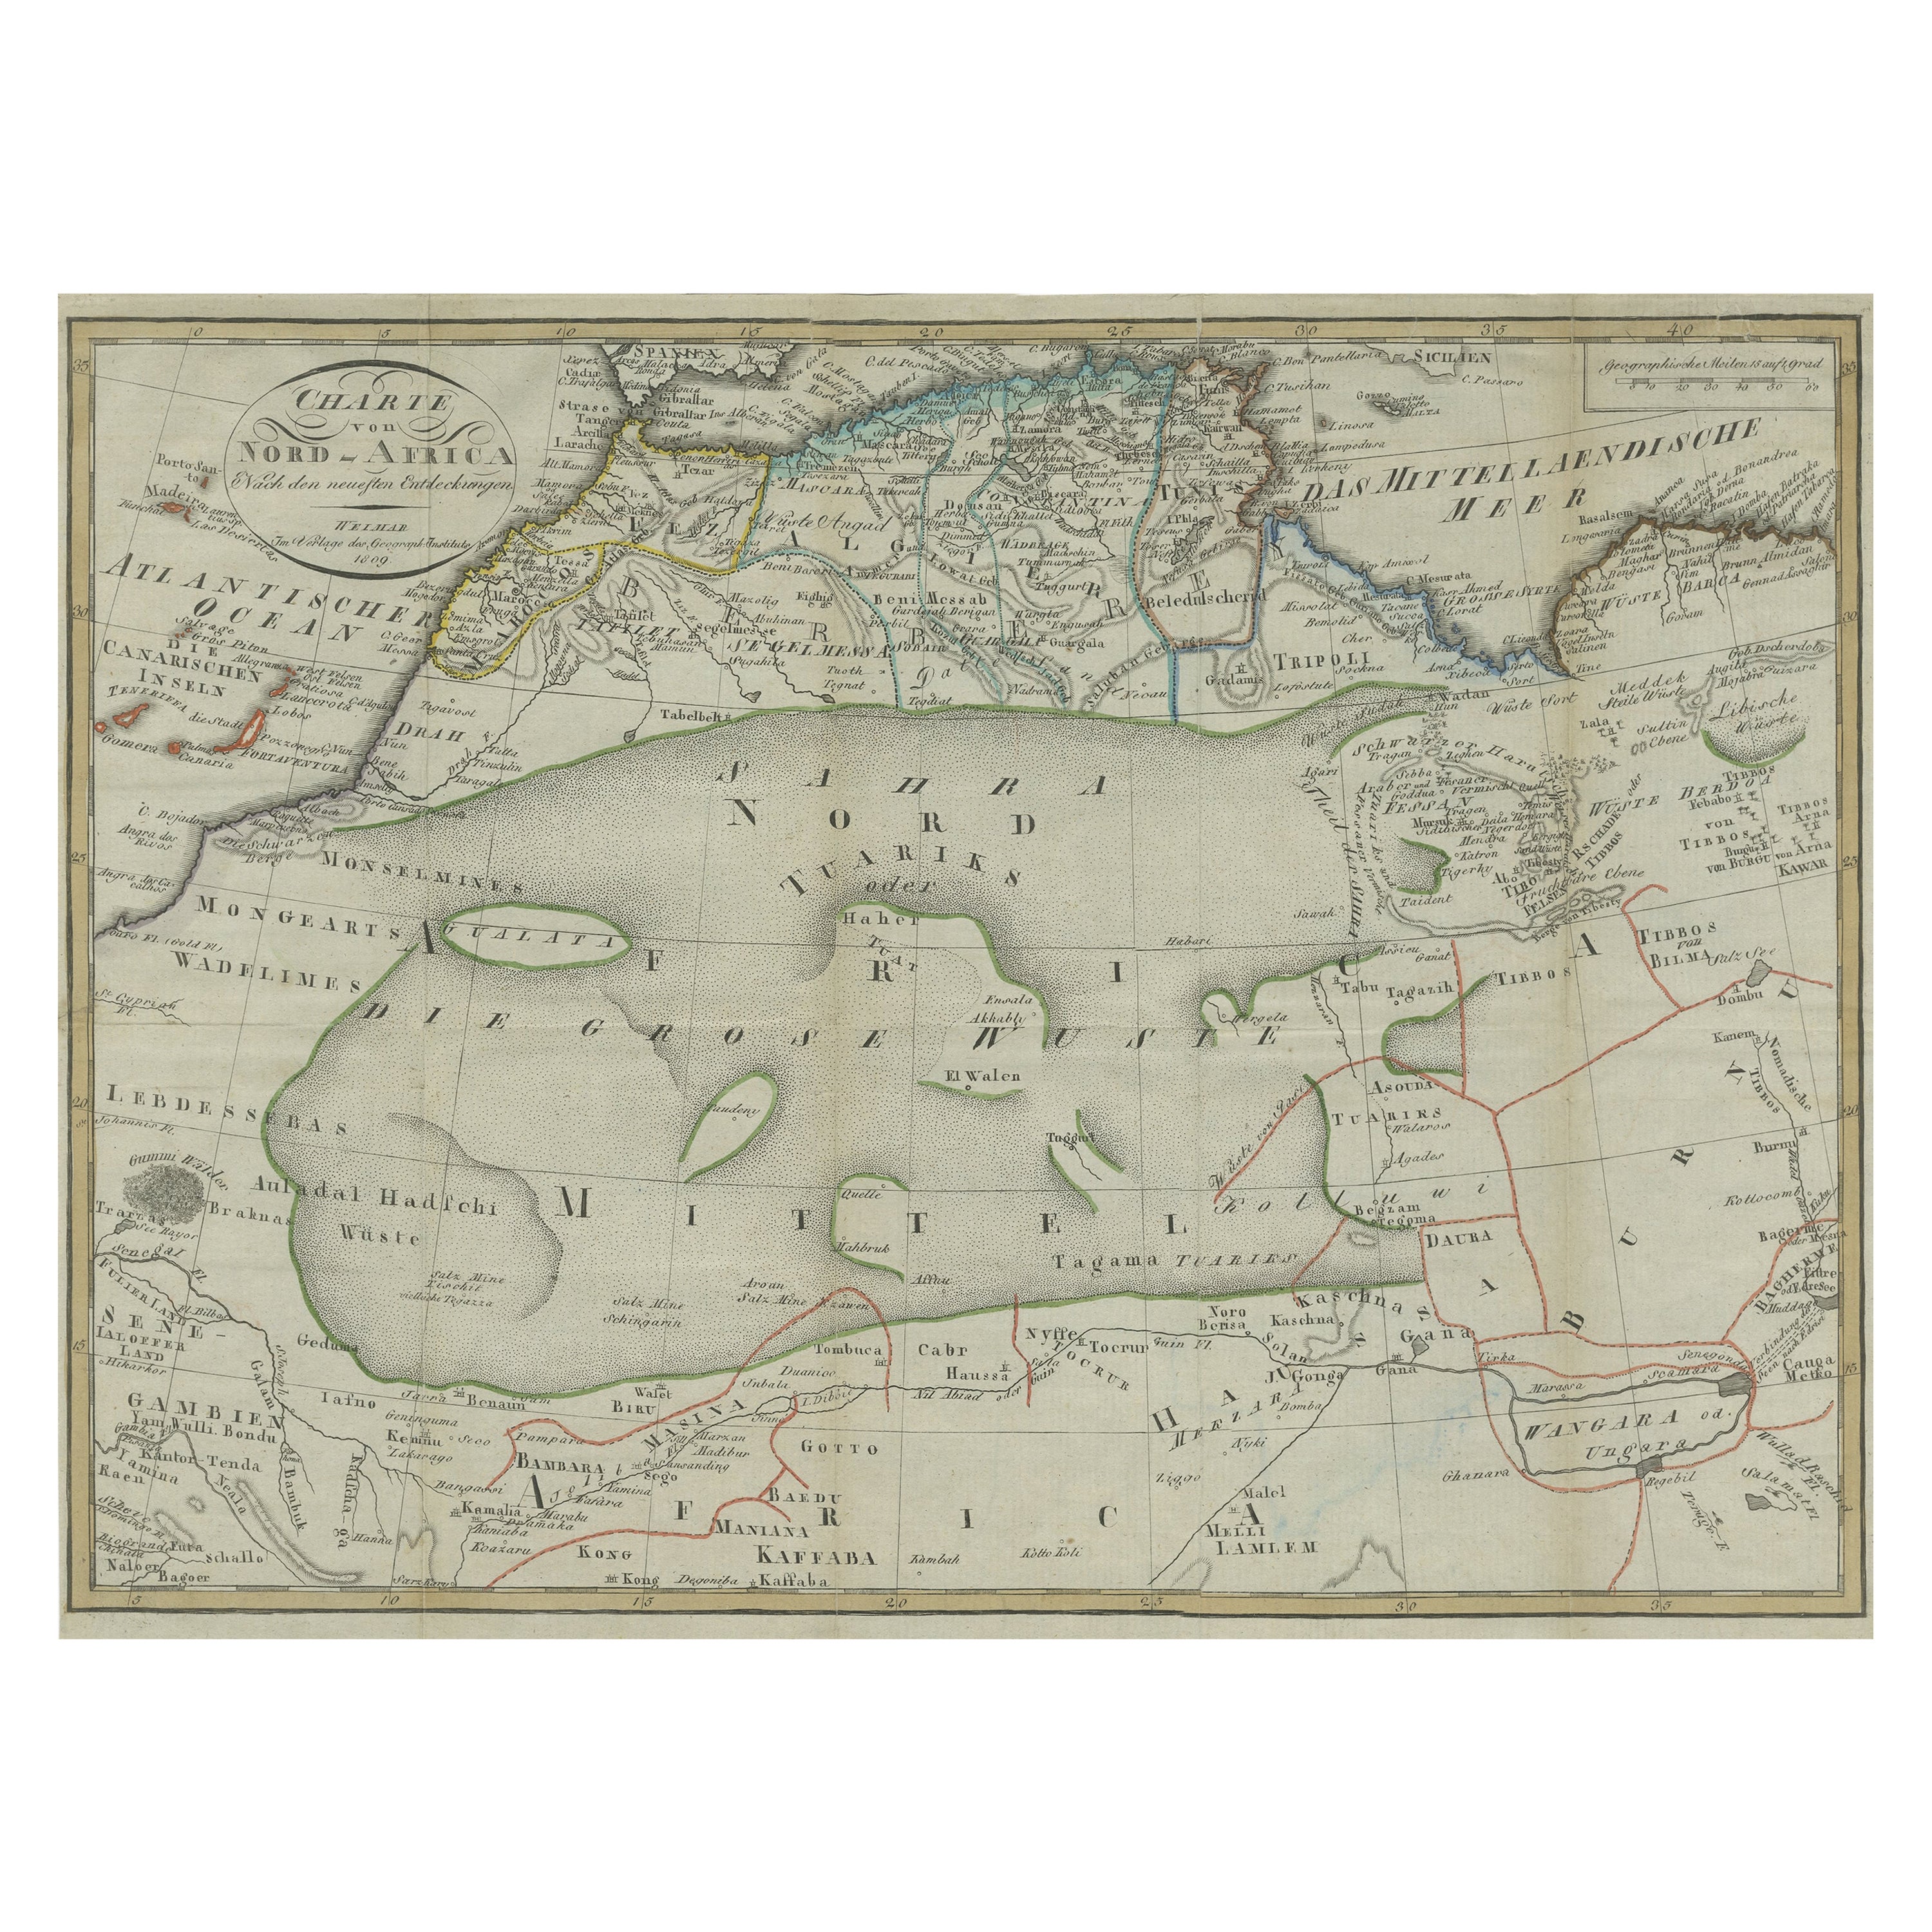 Antique Map of North Africa including the Sahara Desert